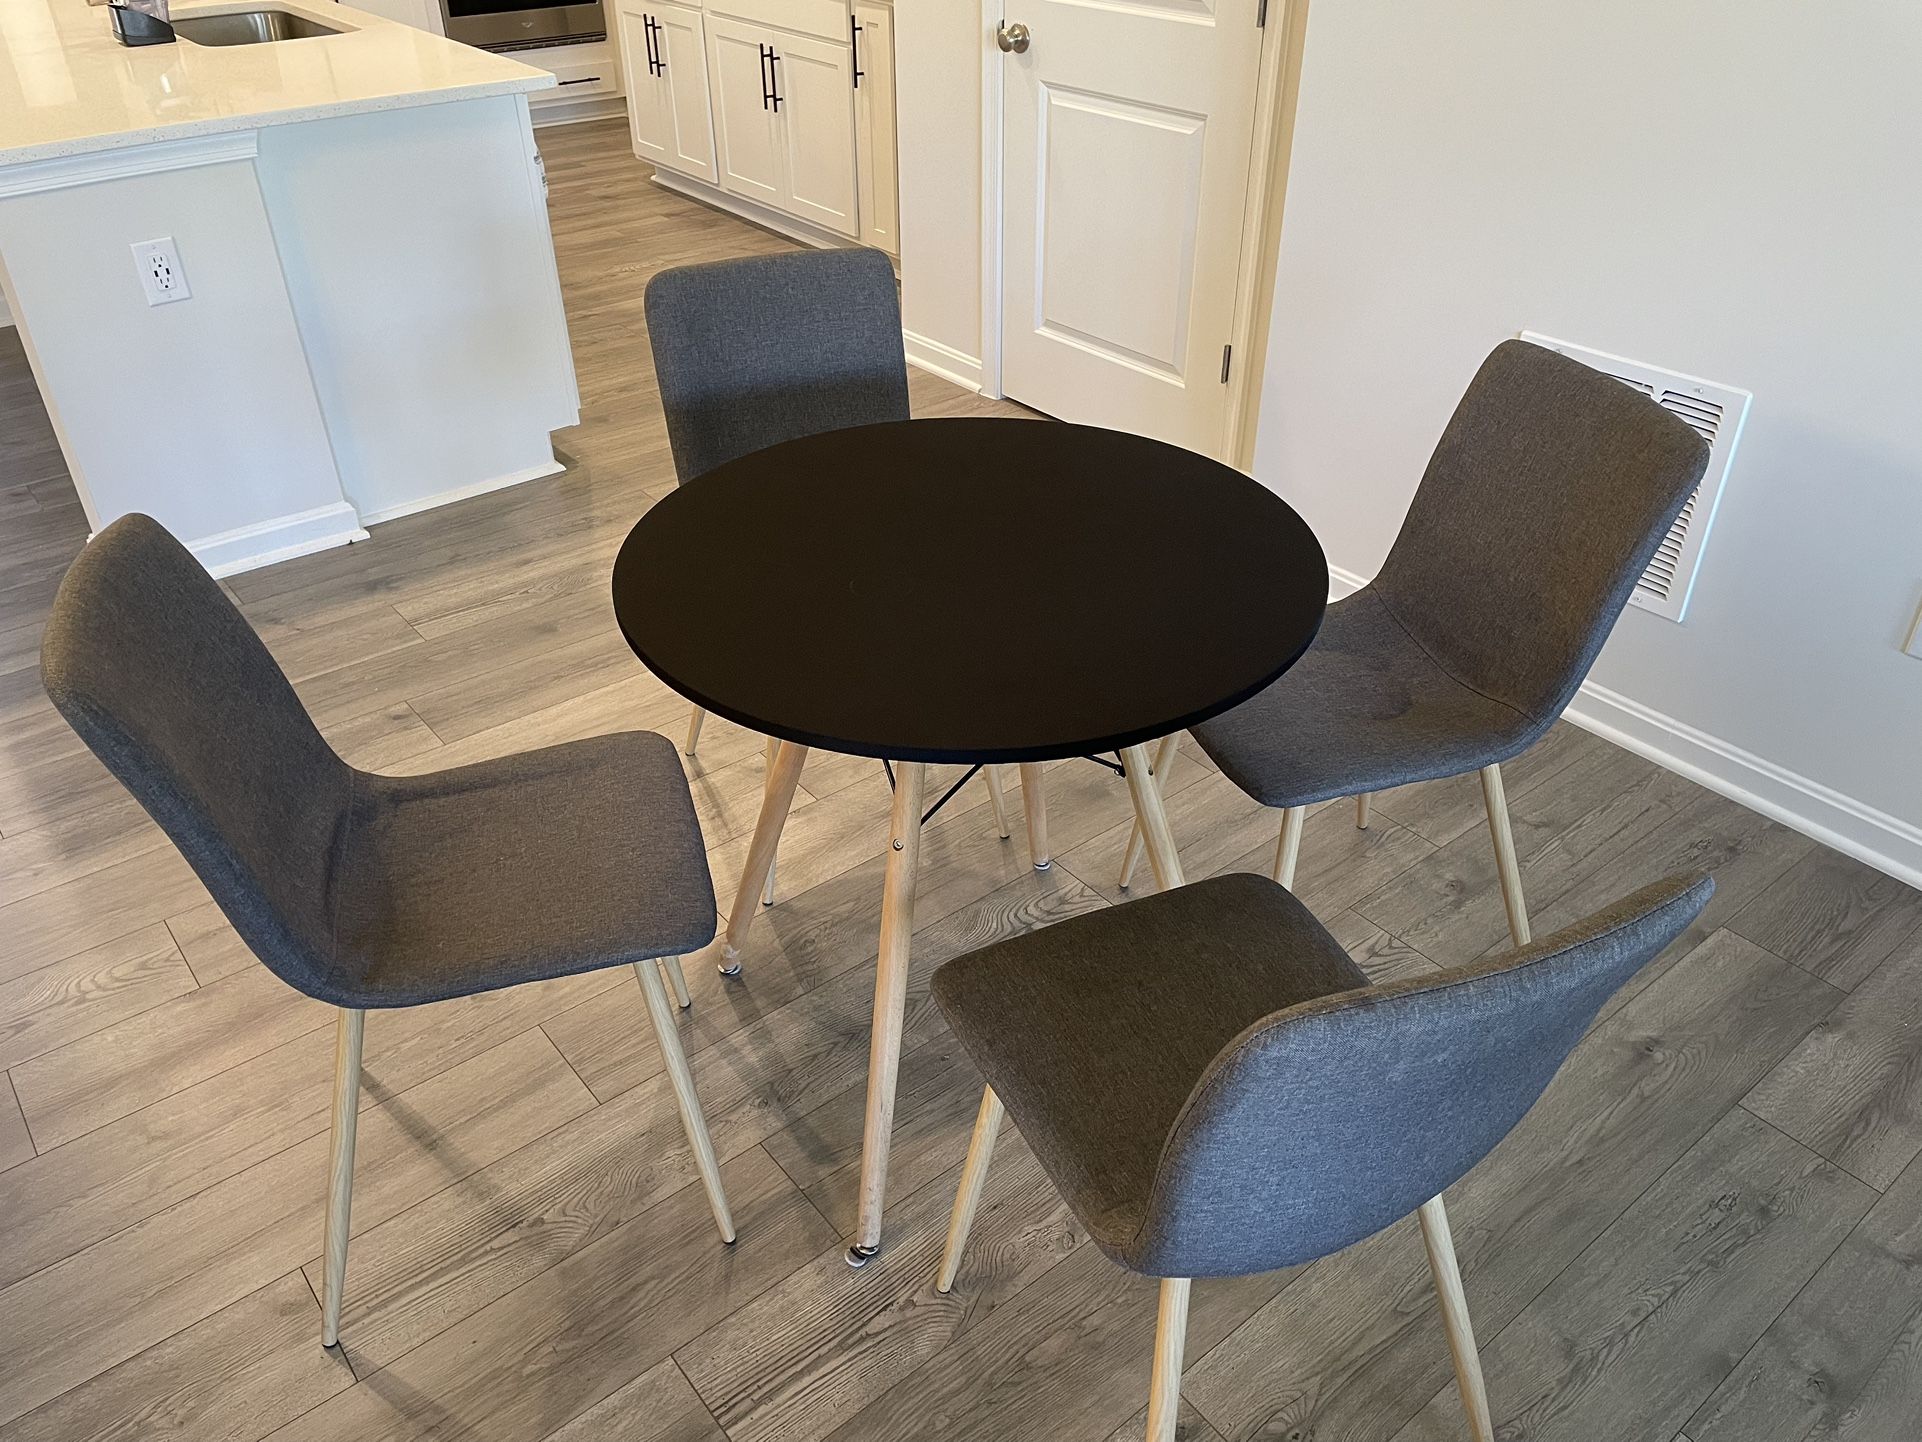 4-chair Round Dining Table